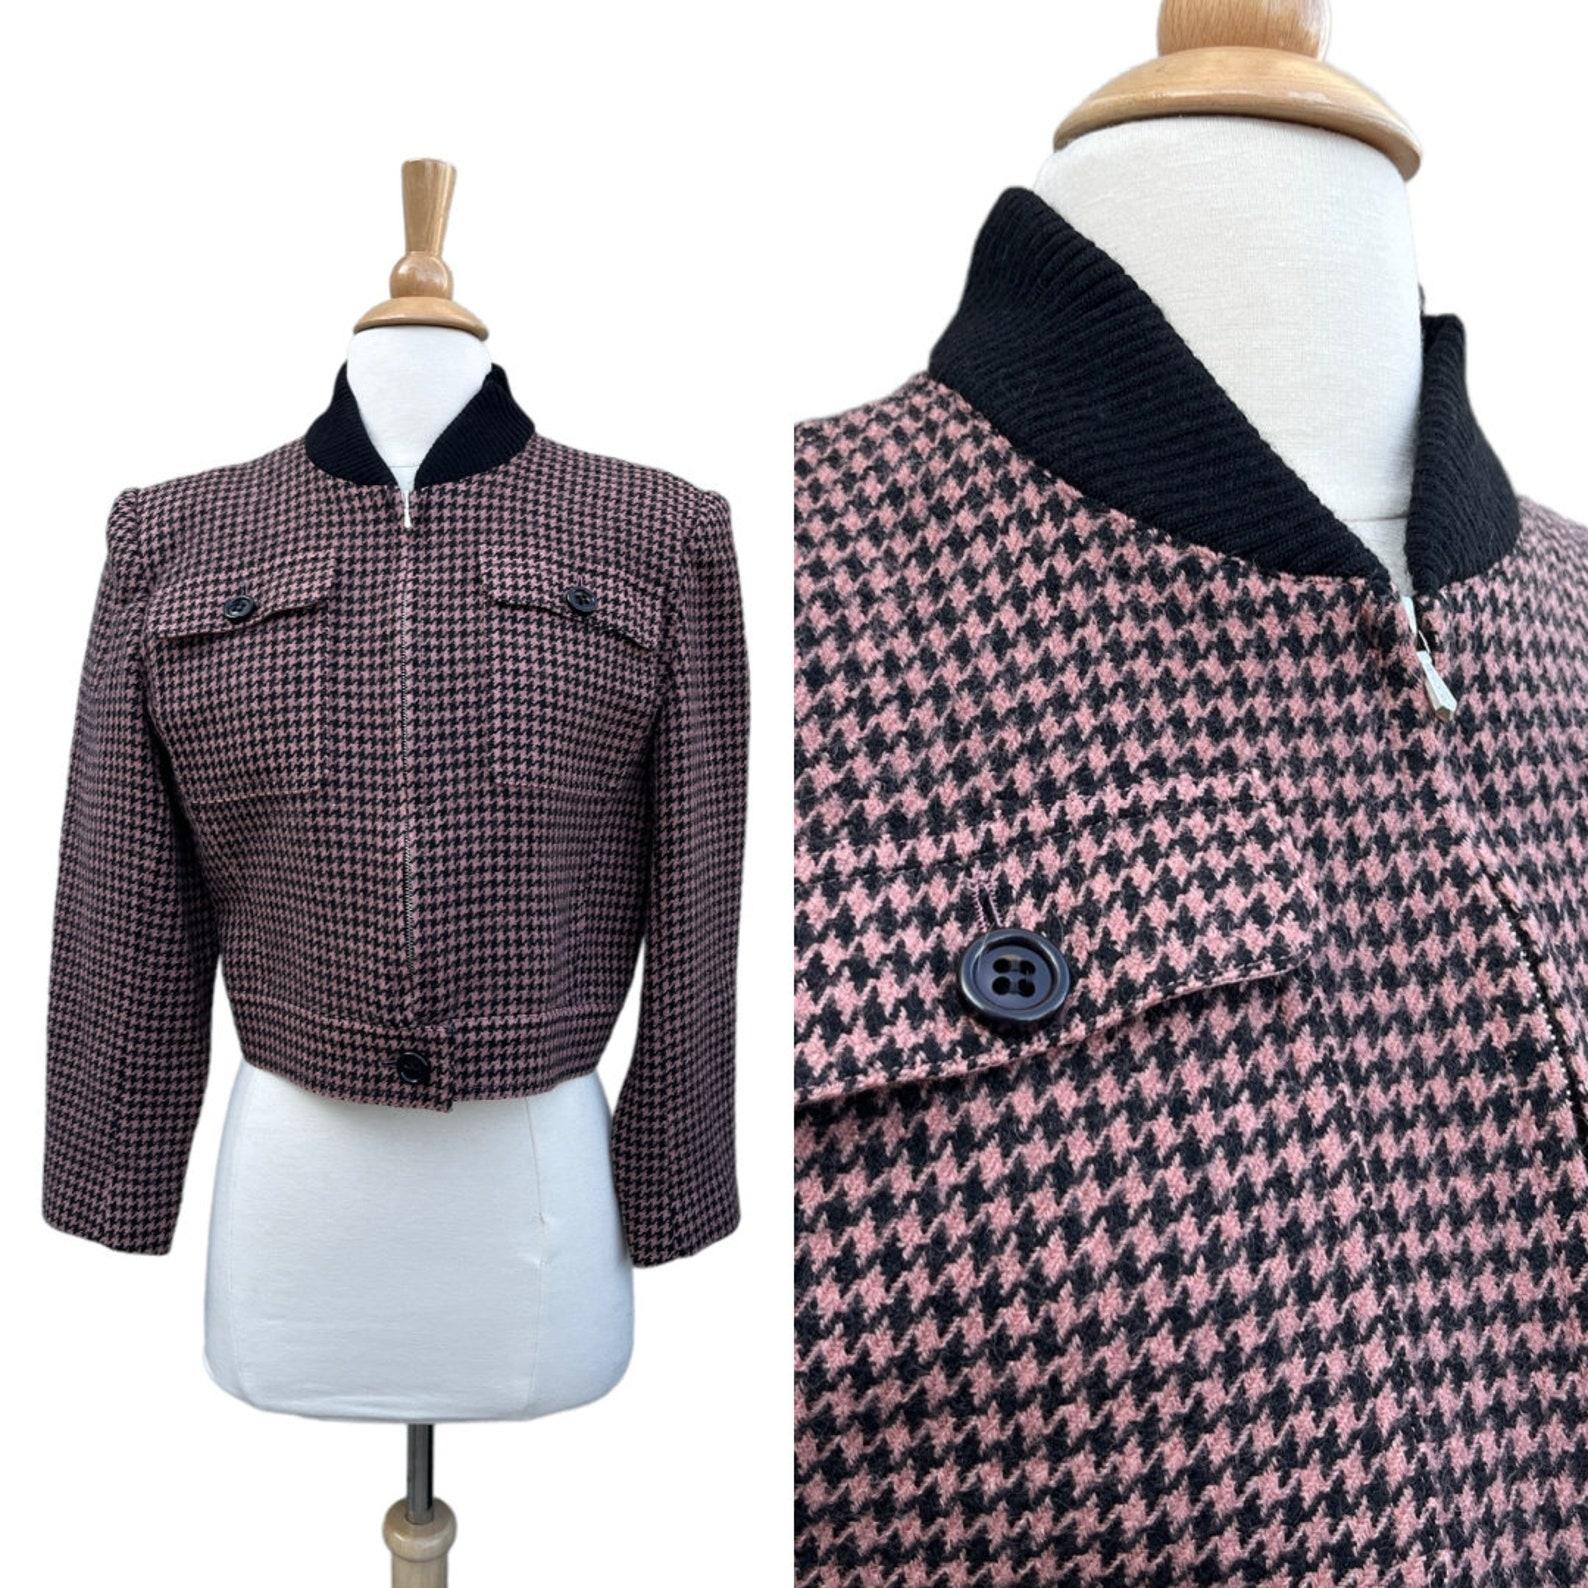 Vintage Guy Laroche bomber style jacket. cropped body. black rubbed collar. dusty rose or lilac and black houndstooth. two chest pockets. small built in shoulder pads. silver metal zip closure + button at hem. jacket is lined. dry cleaned.

Circa